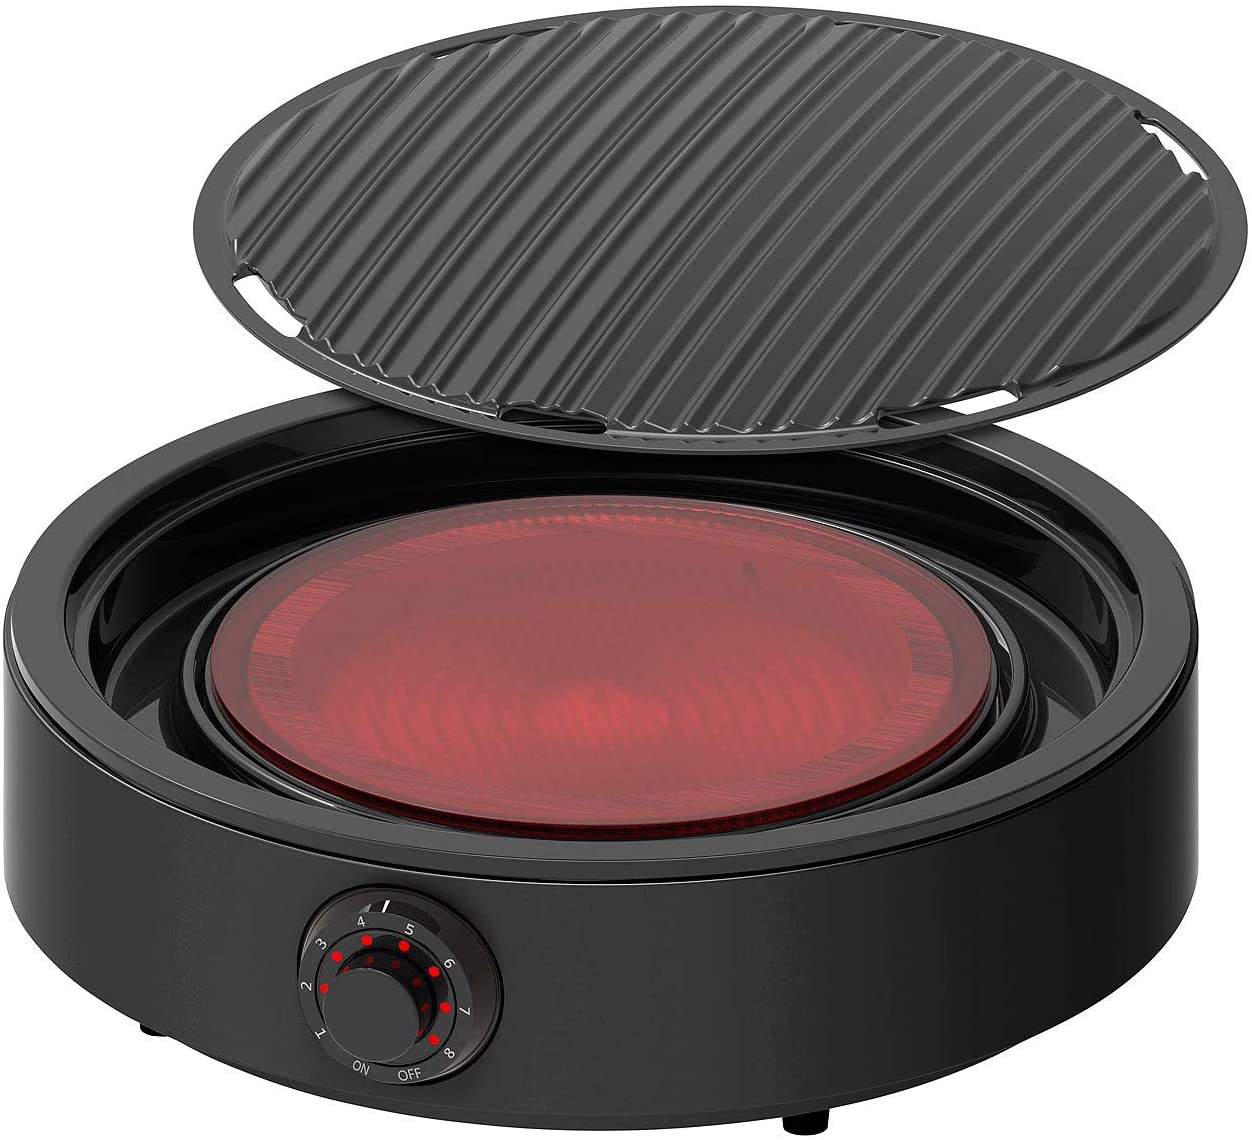 Rosenstein & Söhne Infrared Cooker: 2-in-1 Glass Ceramic Hob and Smokeless Infrared Table Grill, 2,000 W (Infrared Grill)